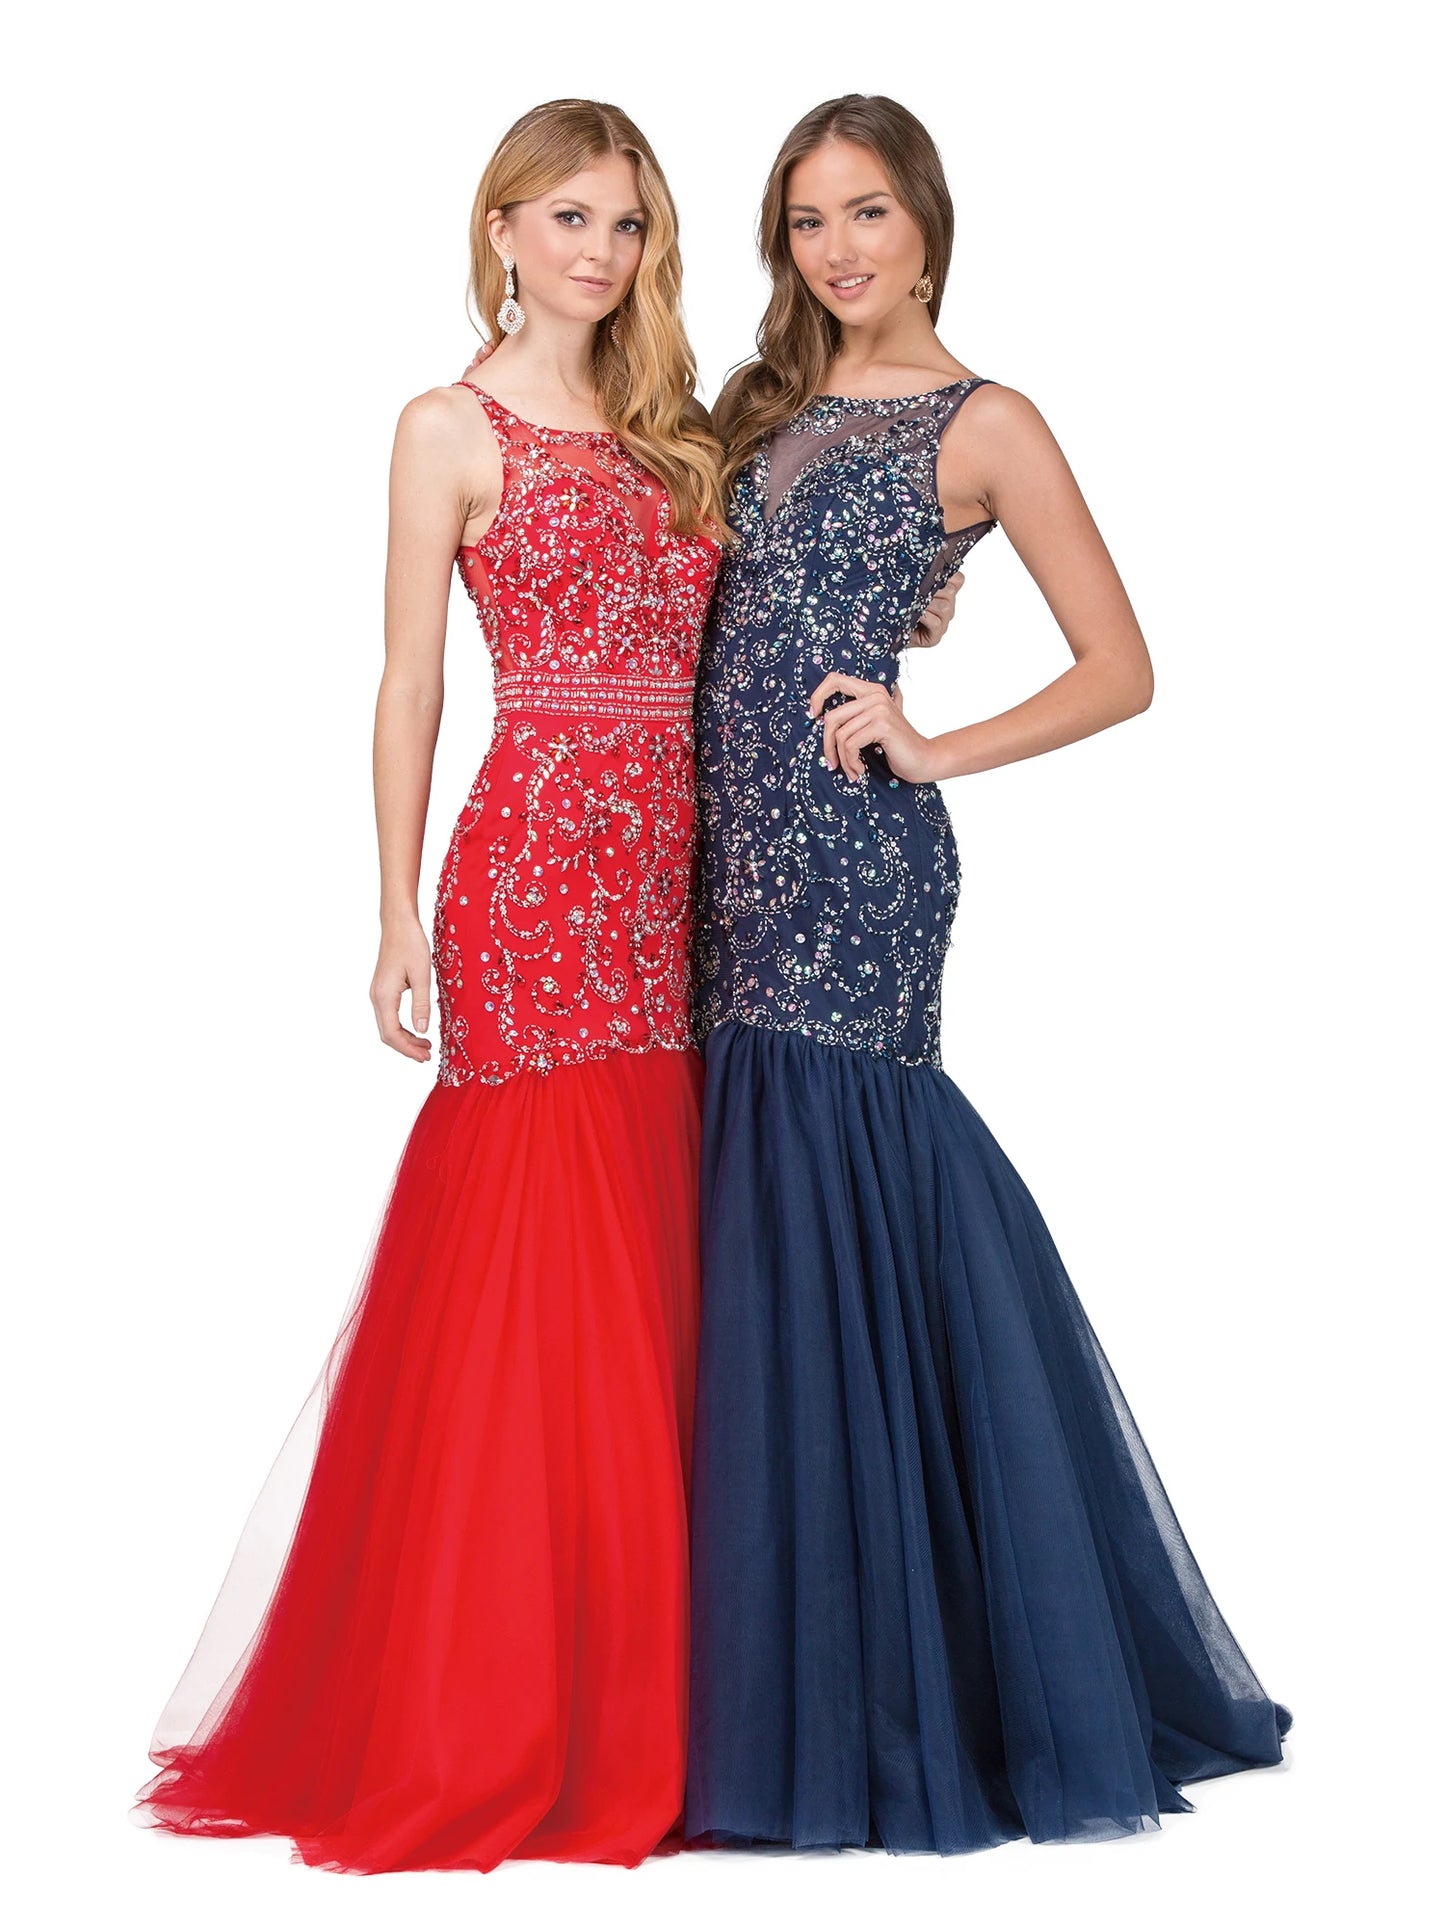 DQ 2250 Long Fitted Embellished Mermaid Prom Dress Sheer high neckline formal Gown  Available Size: 16  Available Color: Navy